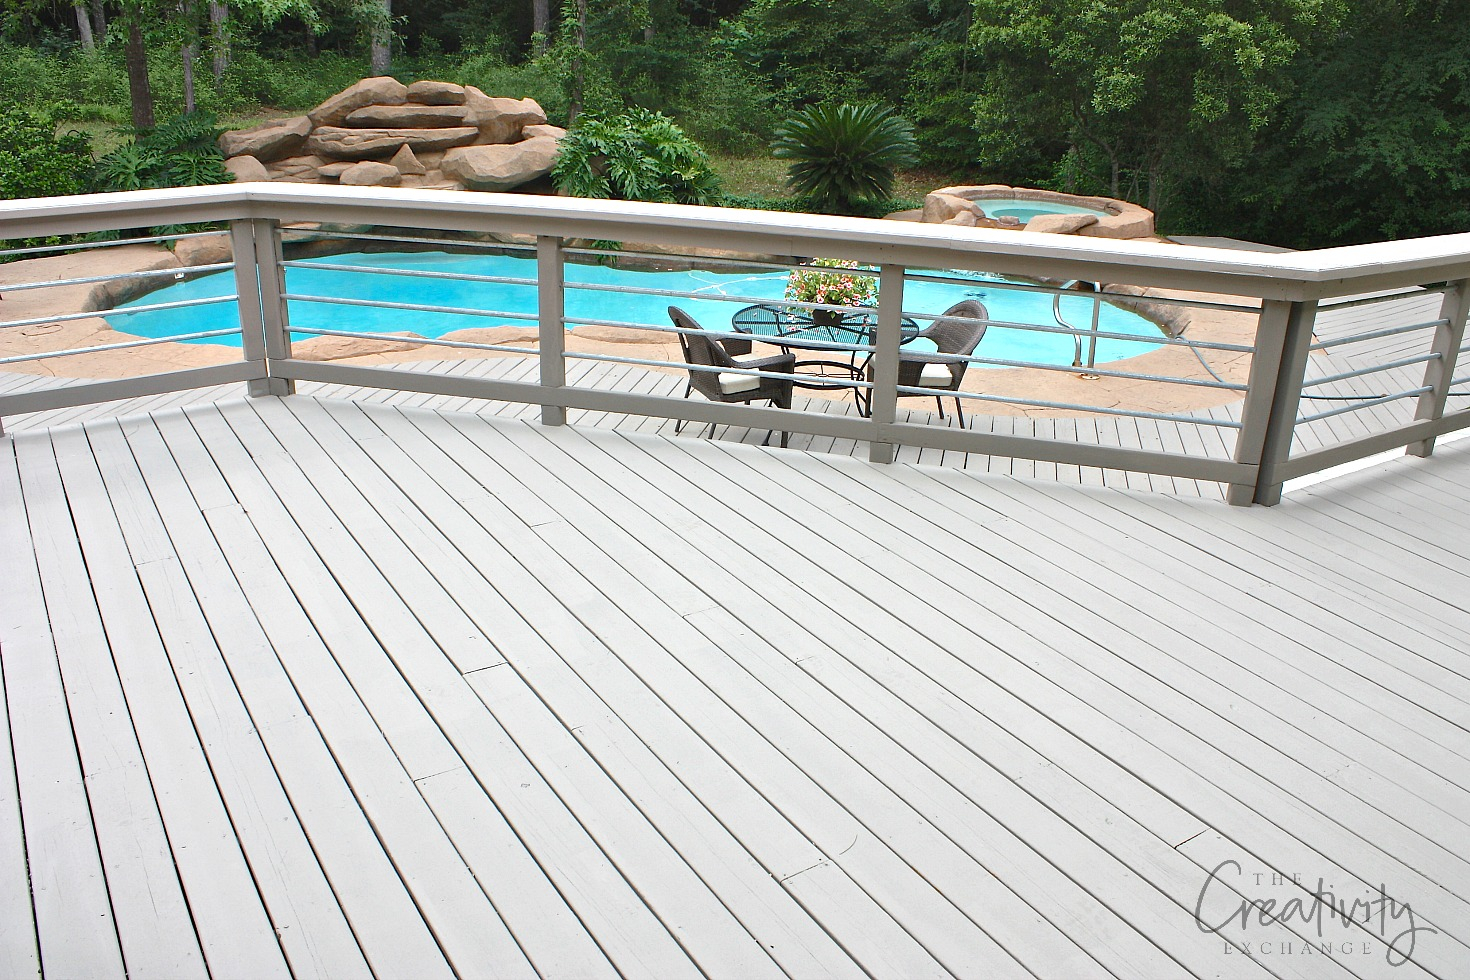 Best Paints To Use On Decks And Exterior Wood Features throughout sizing 1470 X 980